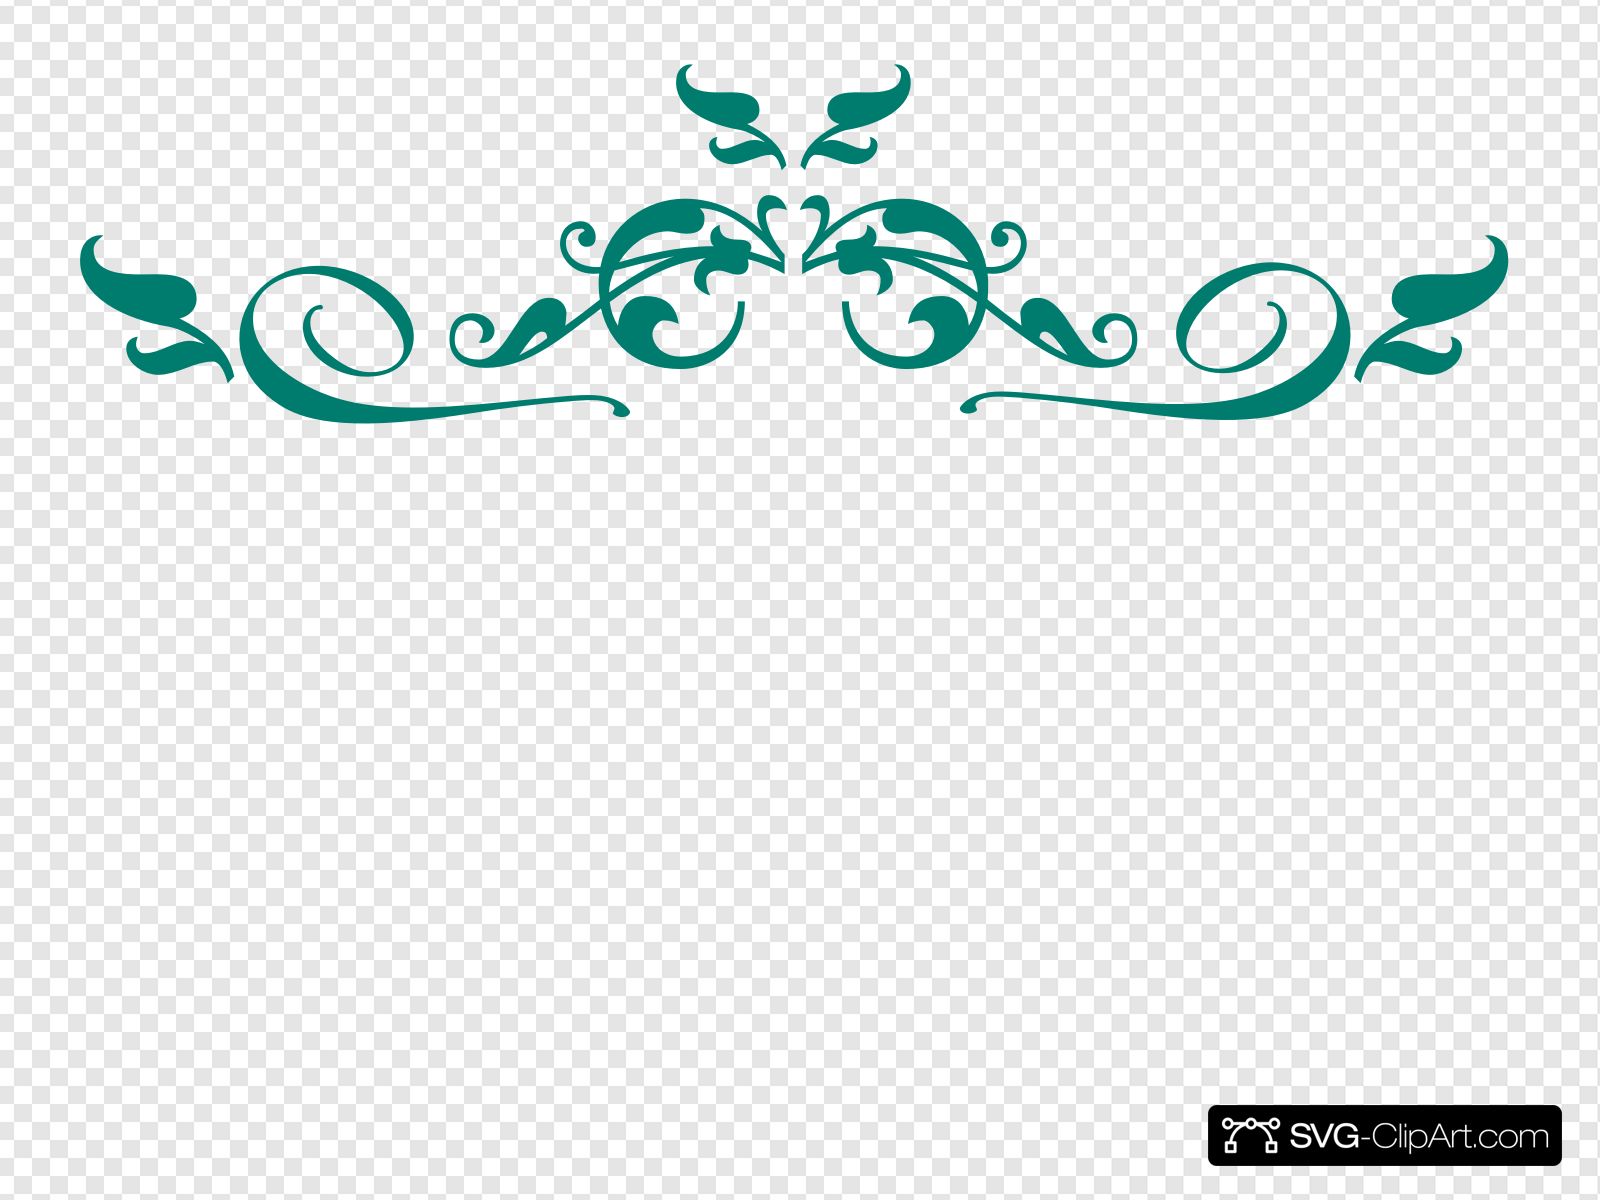 Teal Swirl Clip art, Icon and SVG.